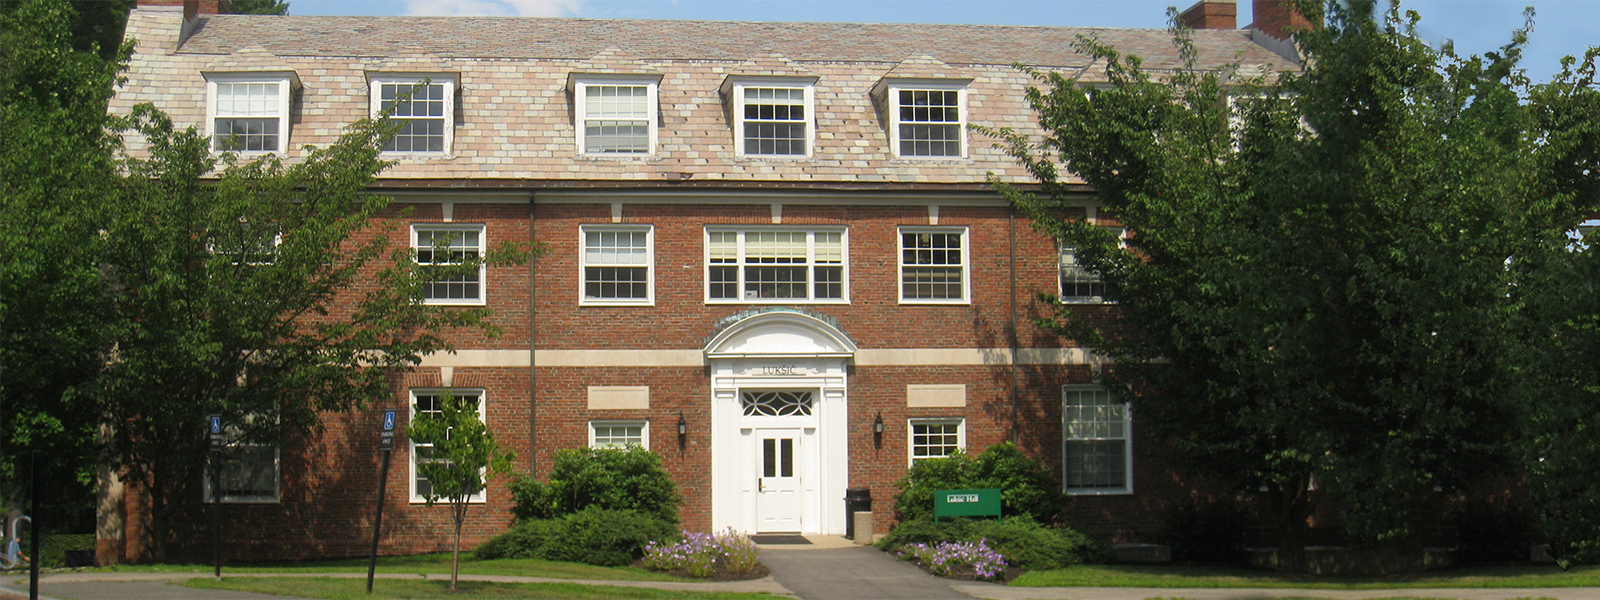 Accounting and Law Division, Luksic Hall